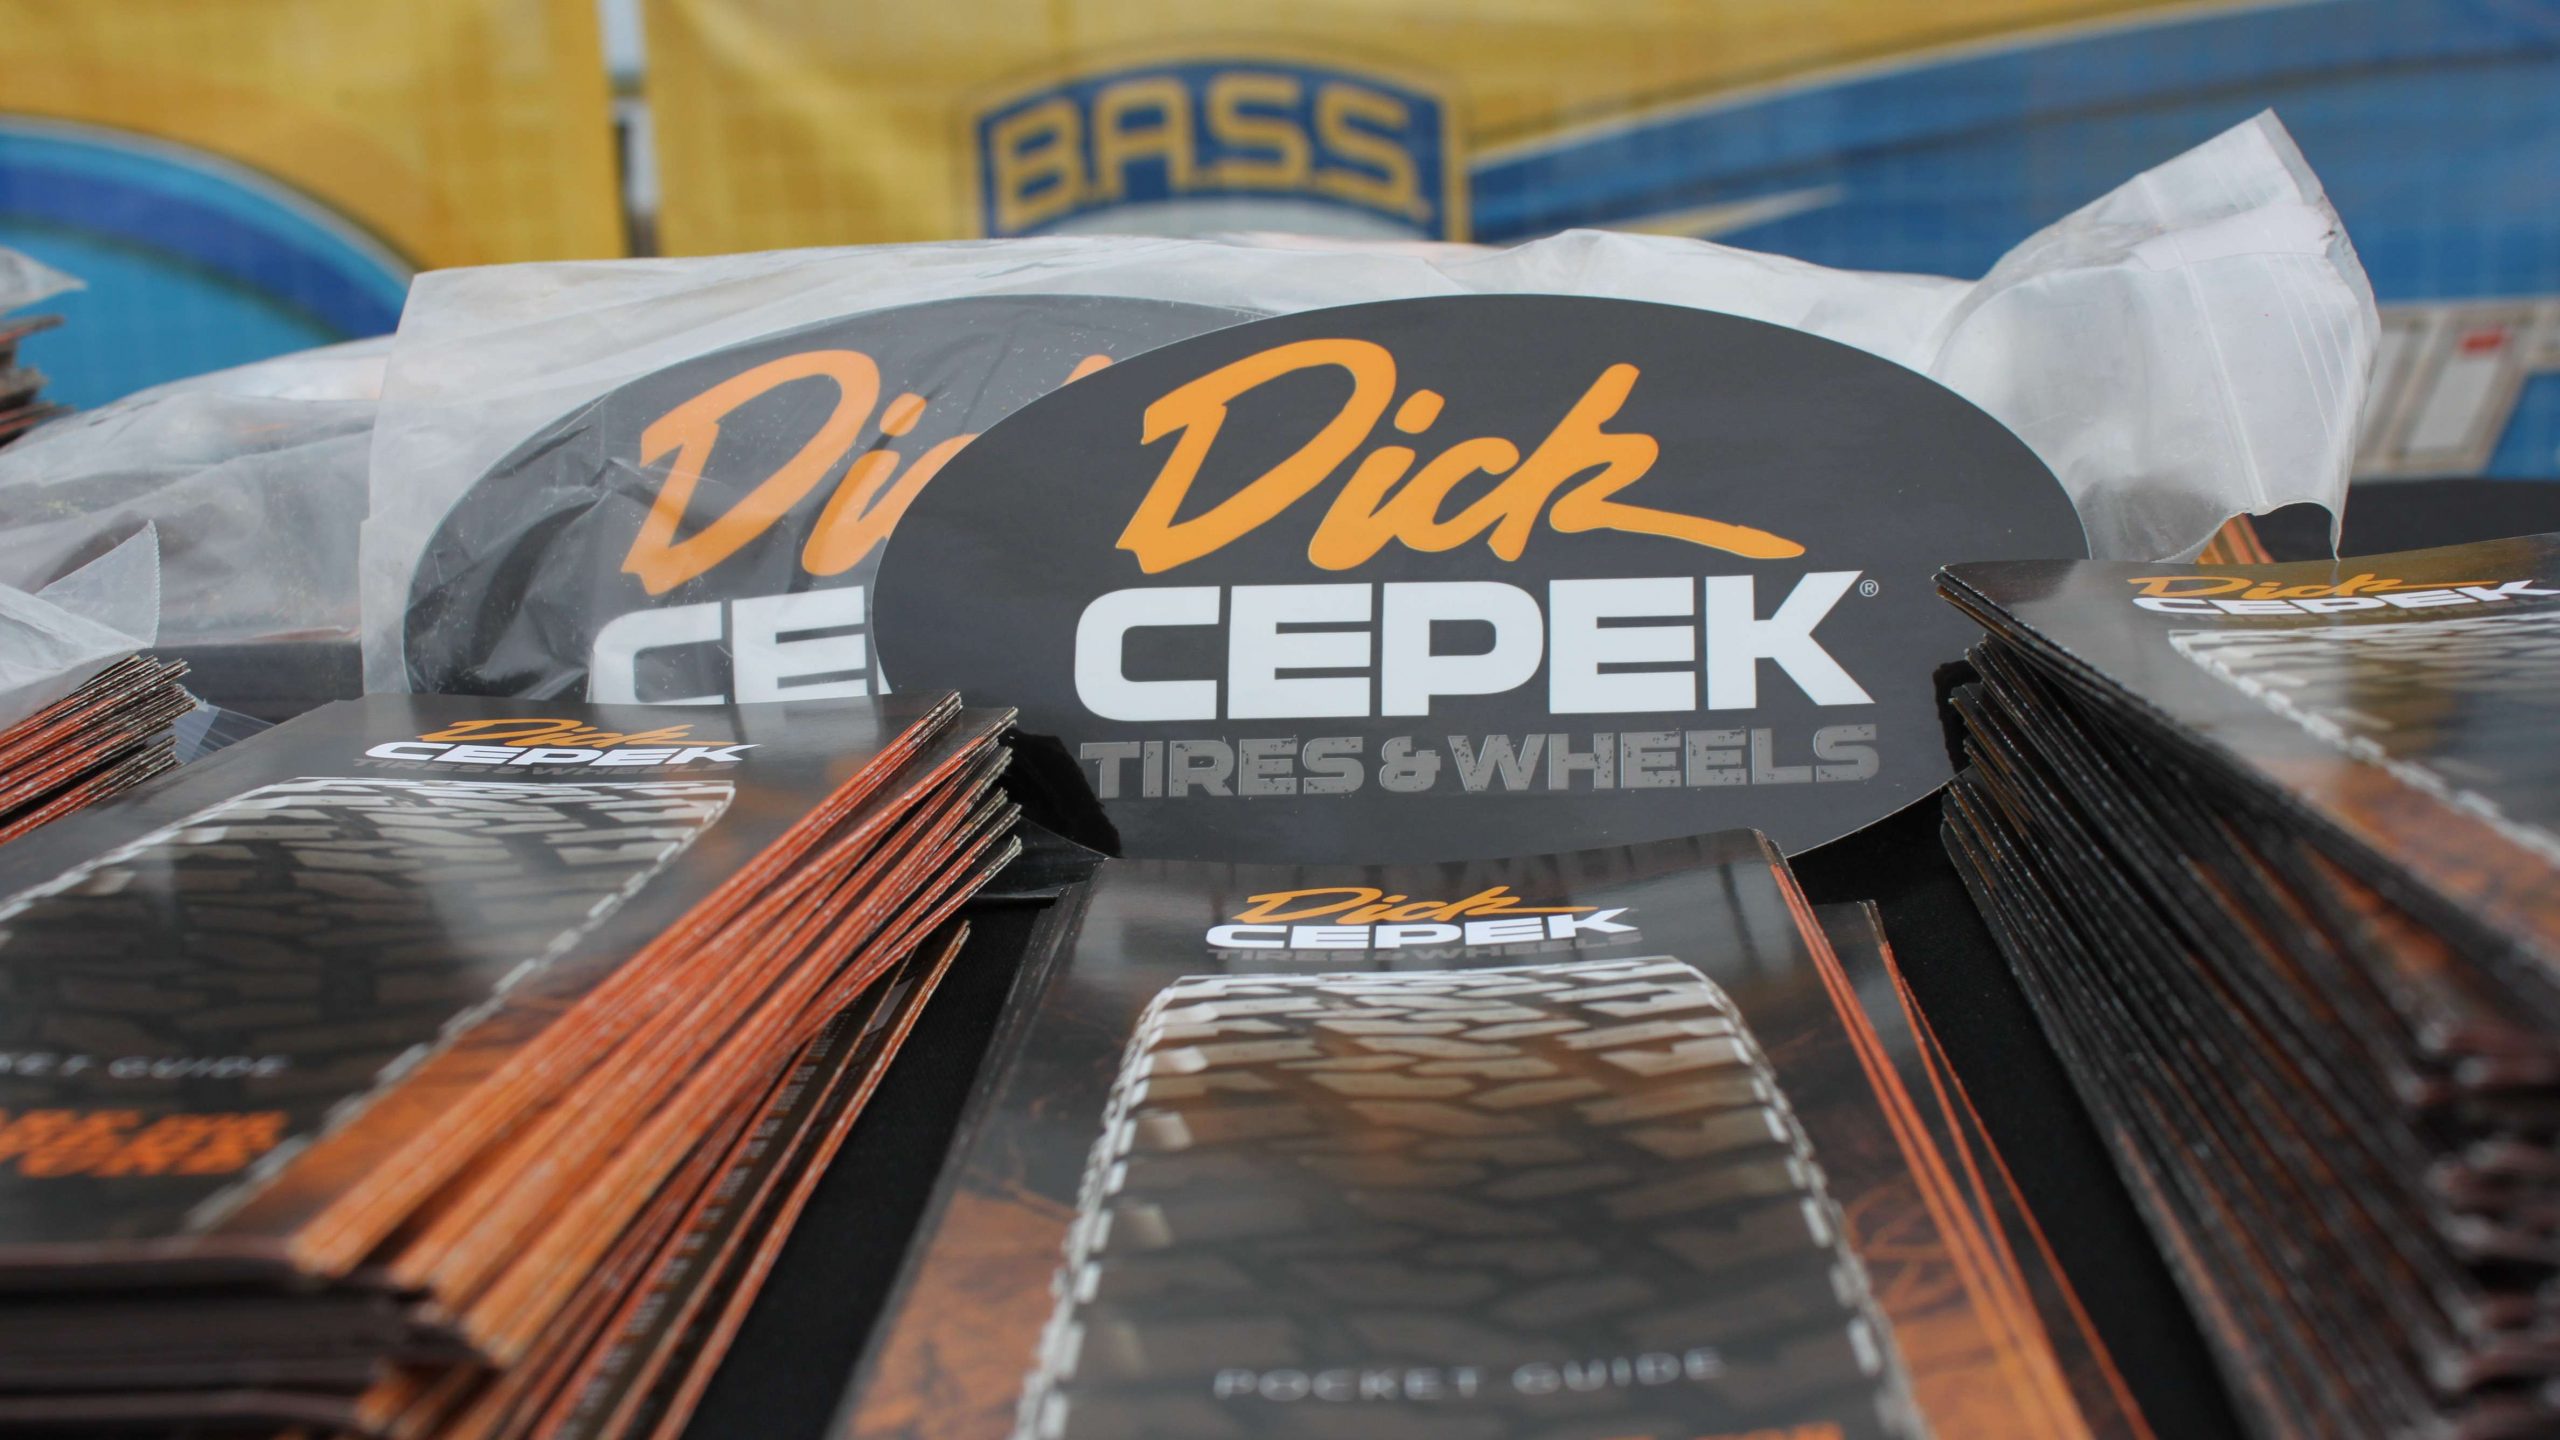  Dick Cepek Tires & Wheels decals were among the handouts.